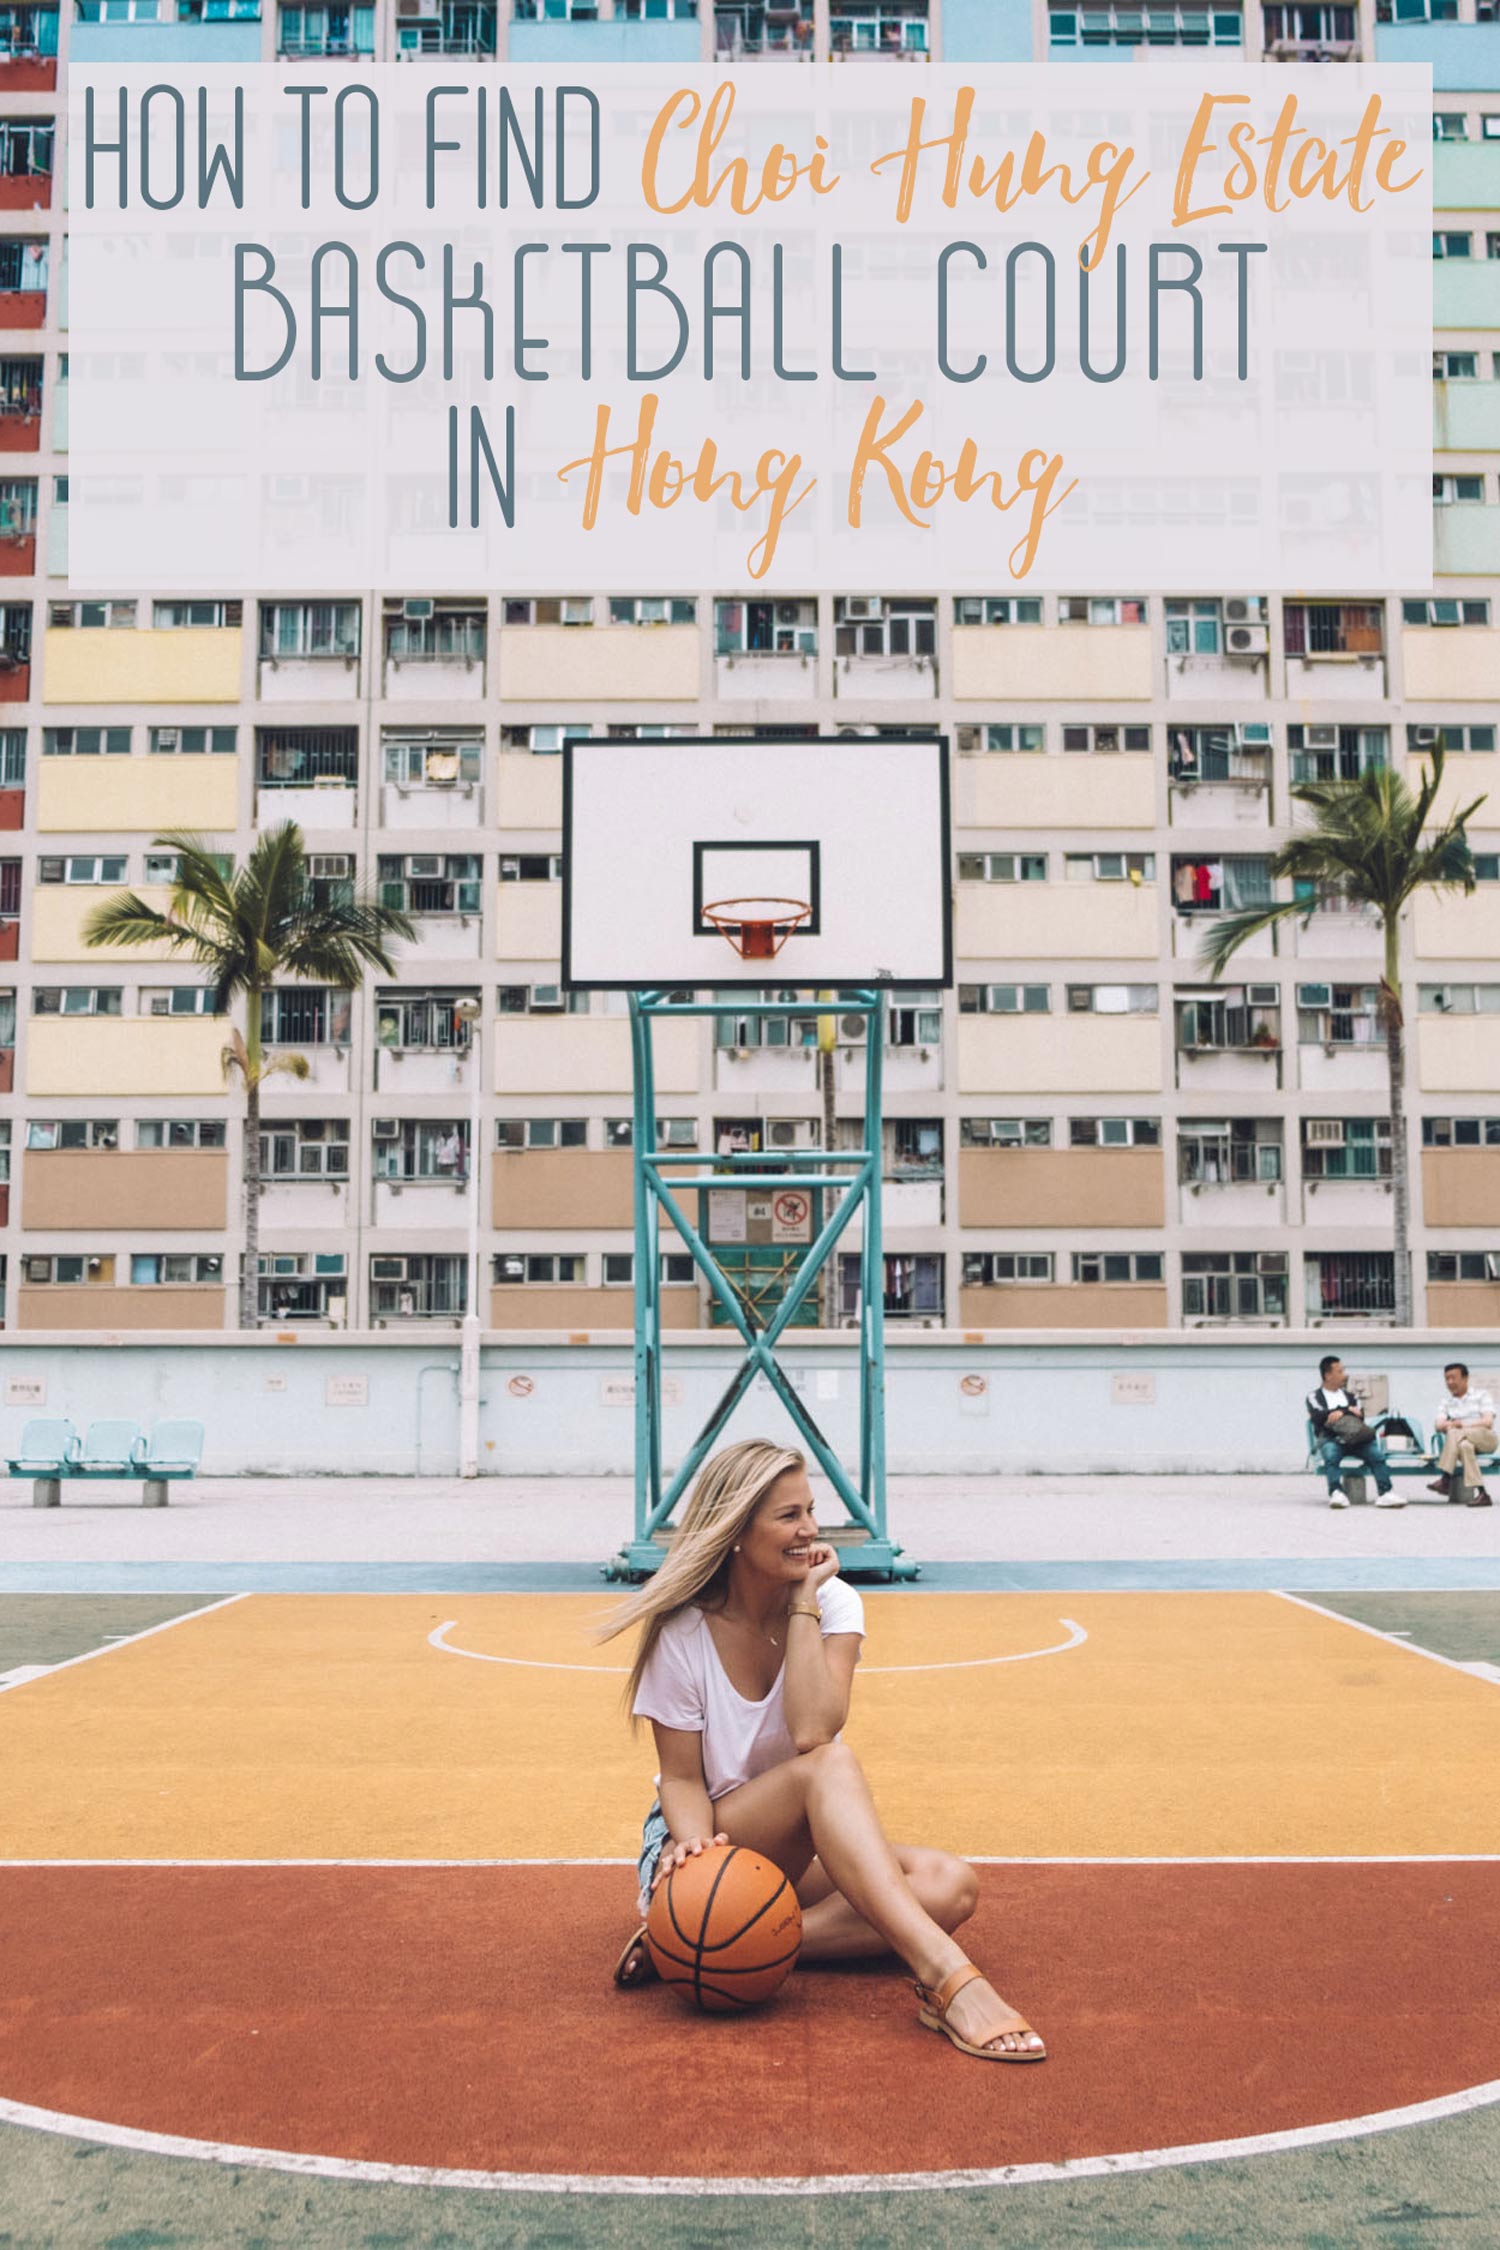 How to Find Choi Hung Estate Basketball Court in Hong Kong